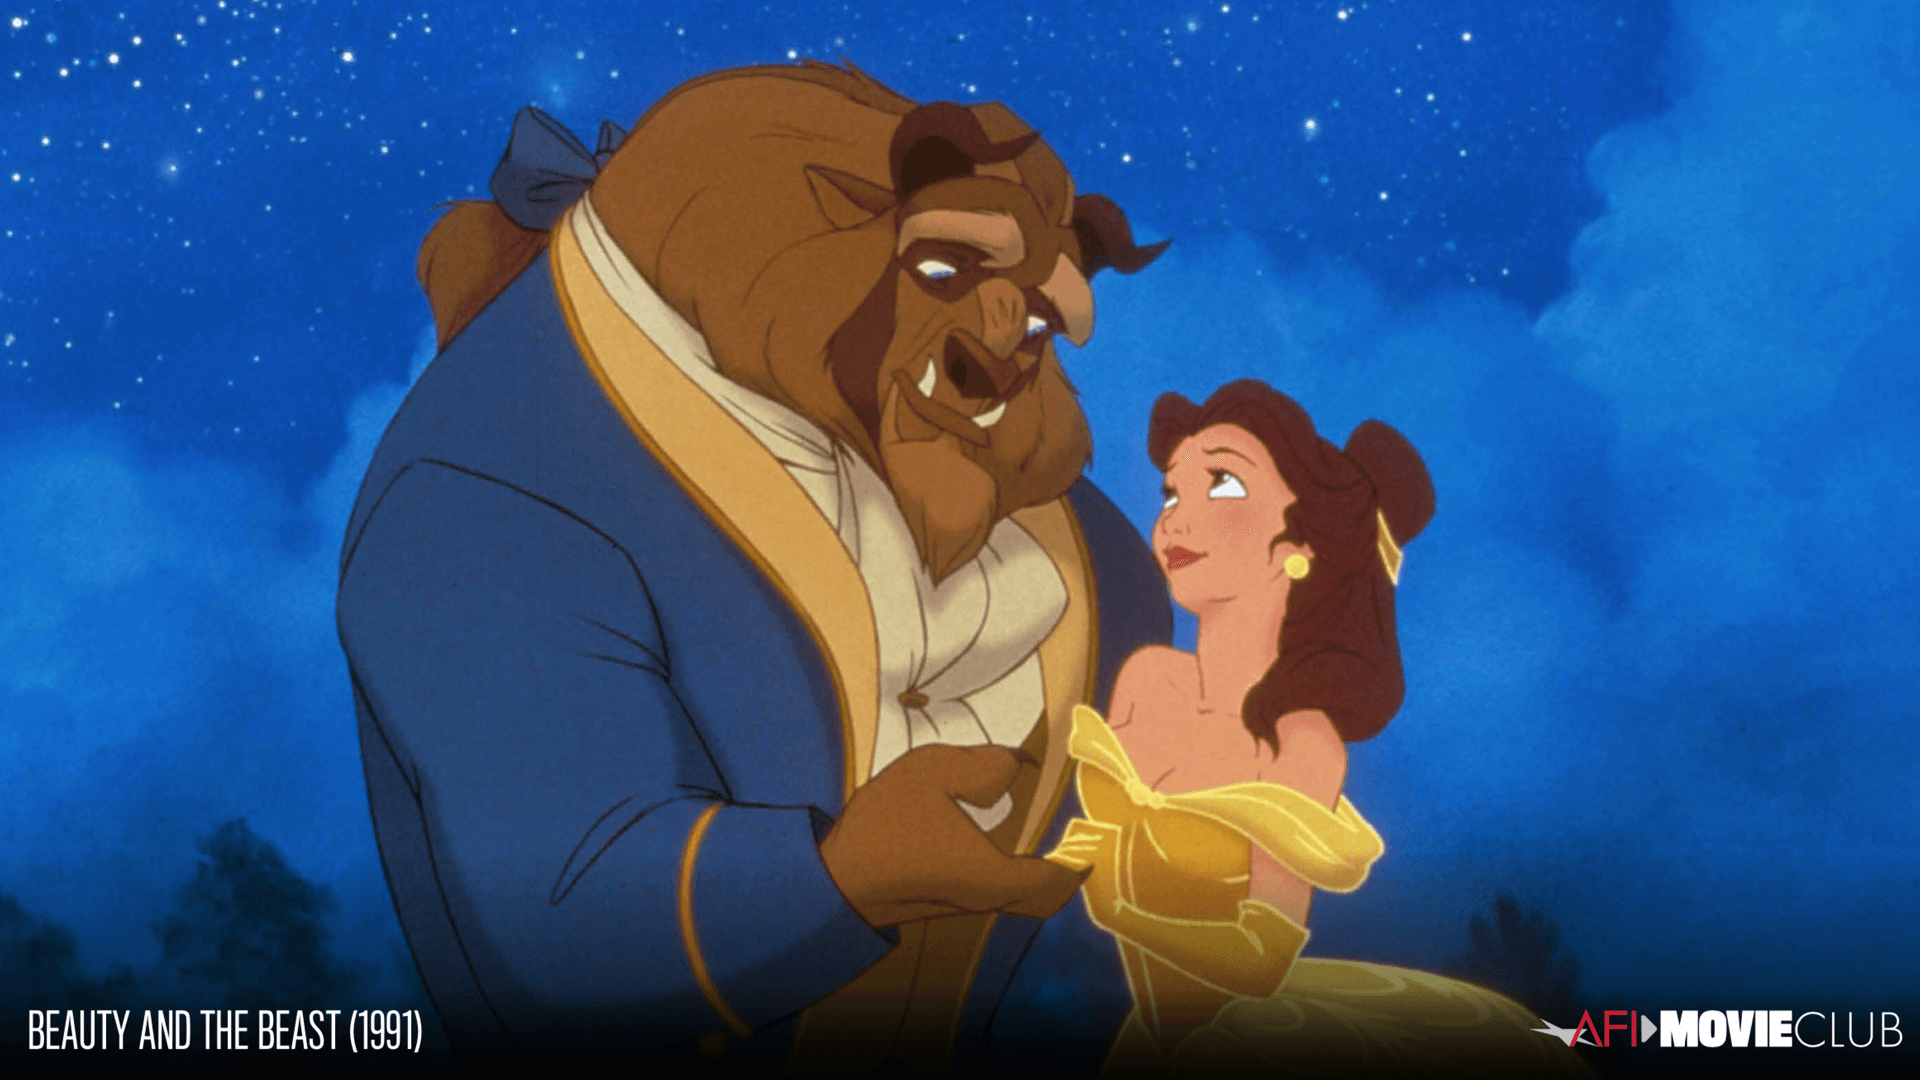 Beauty And The Beast Film Still - The Beast and Belle